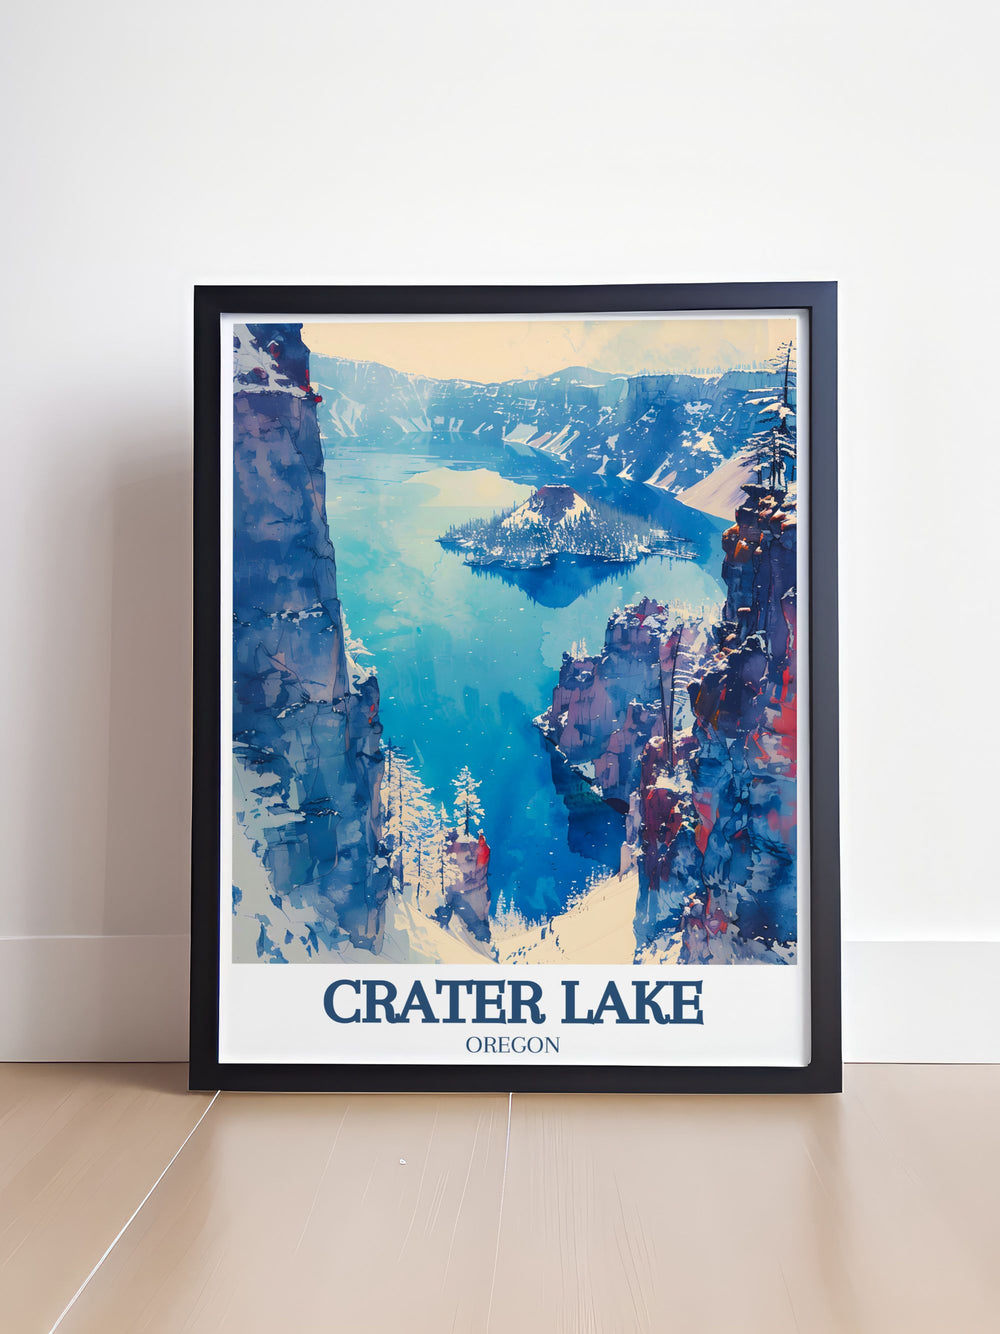 This national park poster captures the stunning beauty of Crater Lake and the serene waters of Wizard Island, perfect for adding a touch of Oregons natural wonder to your decor.